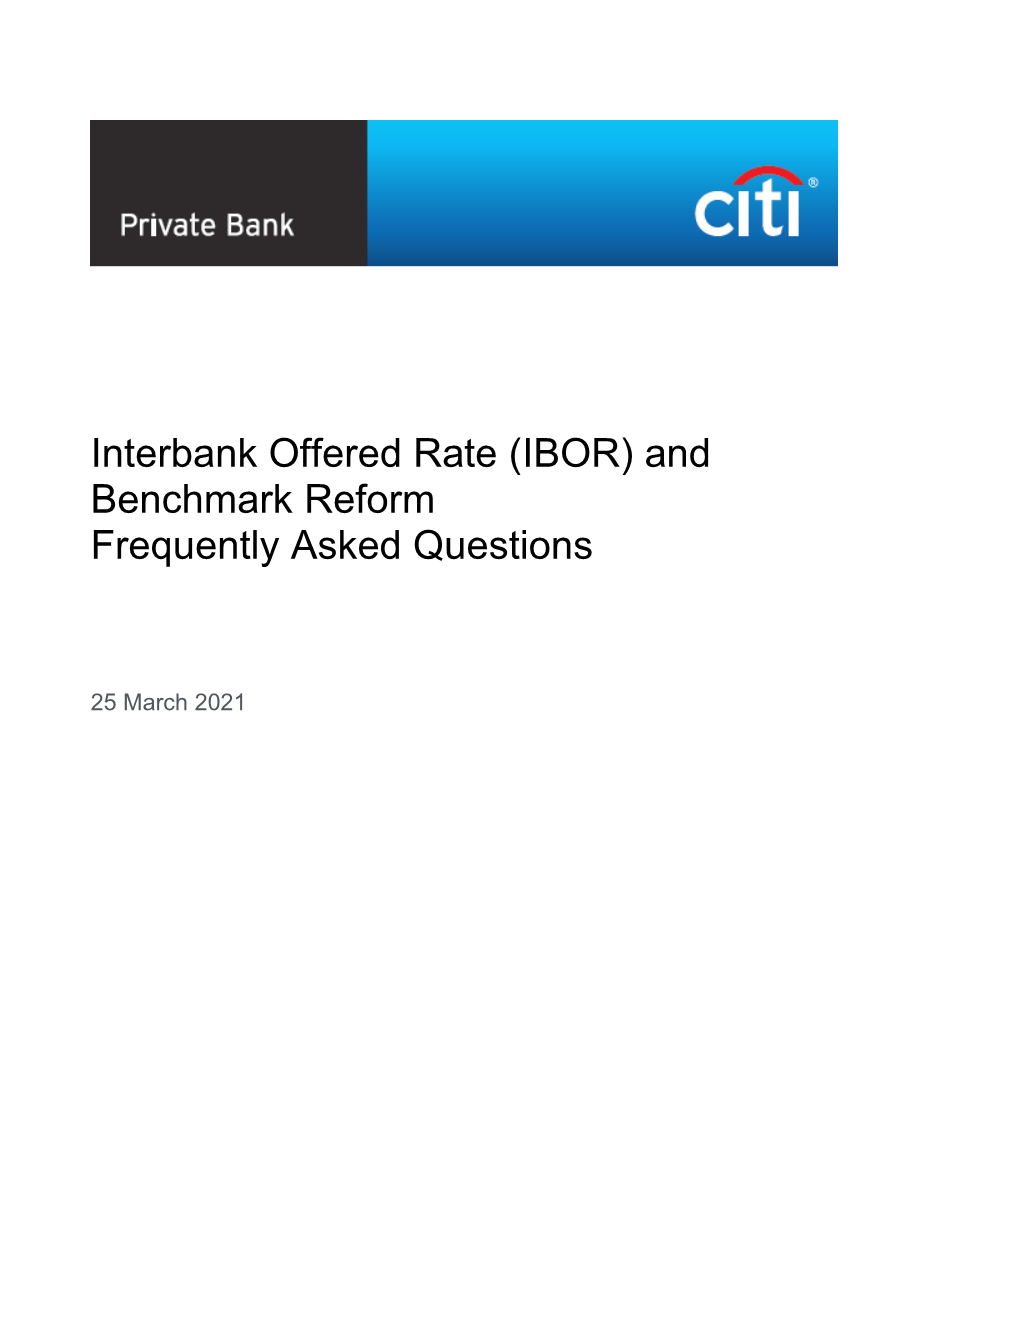 Interbank Offered Rate (IBOR) and Benchmark Reform Frequently Asked Questions